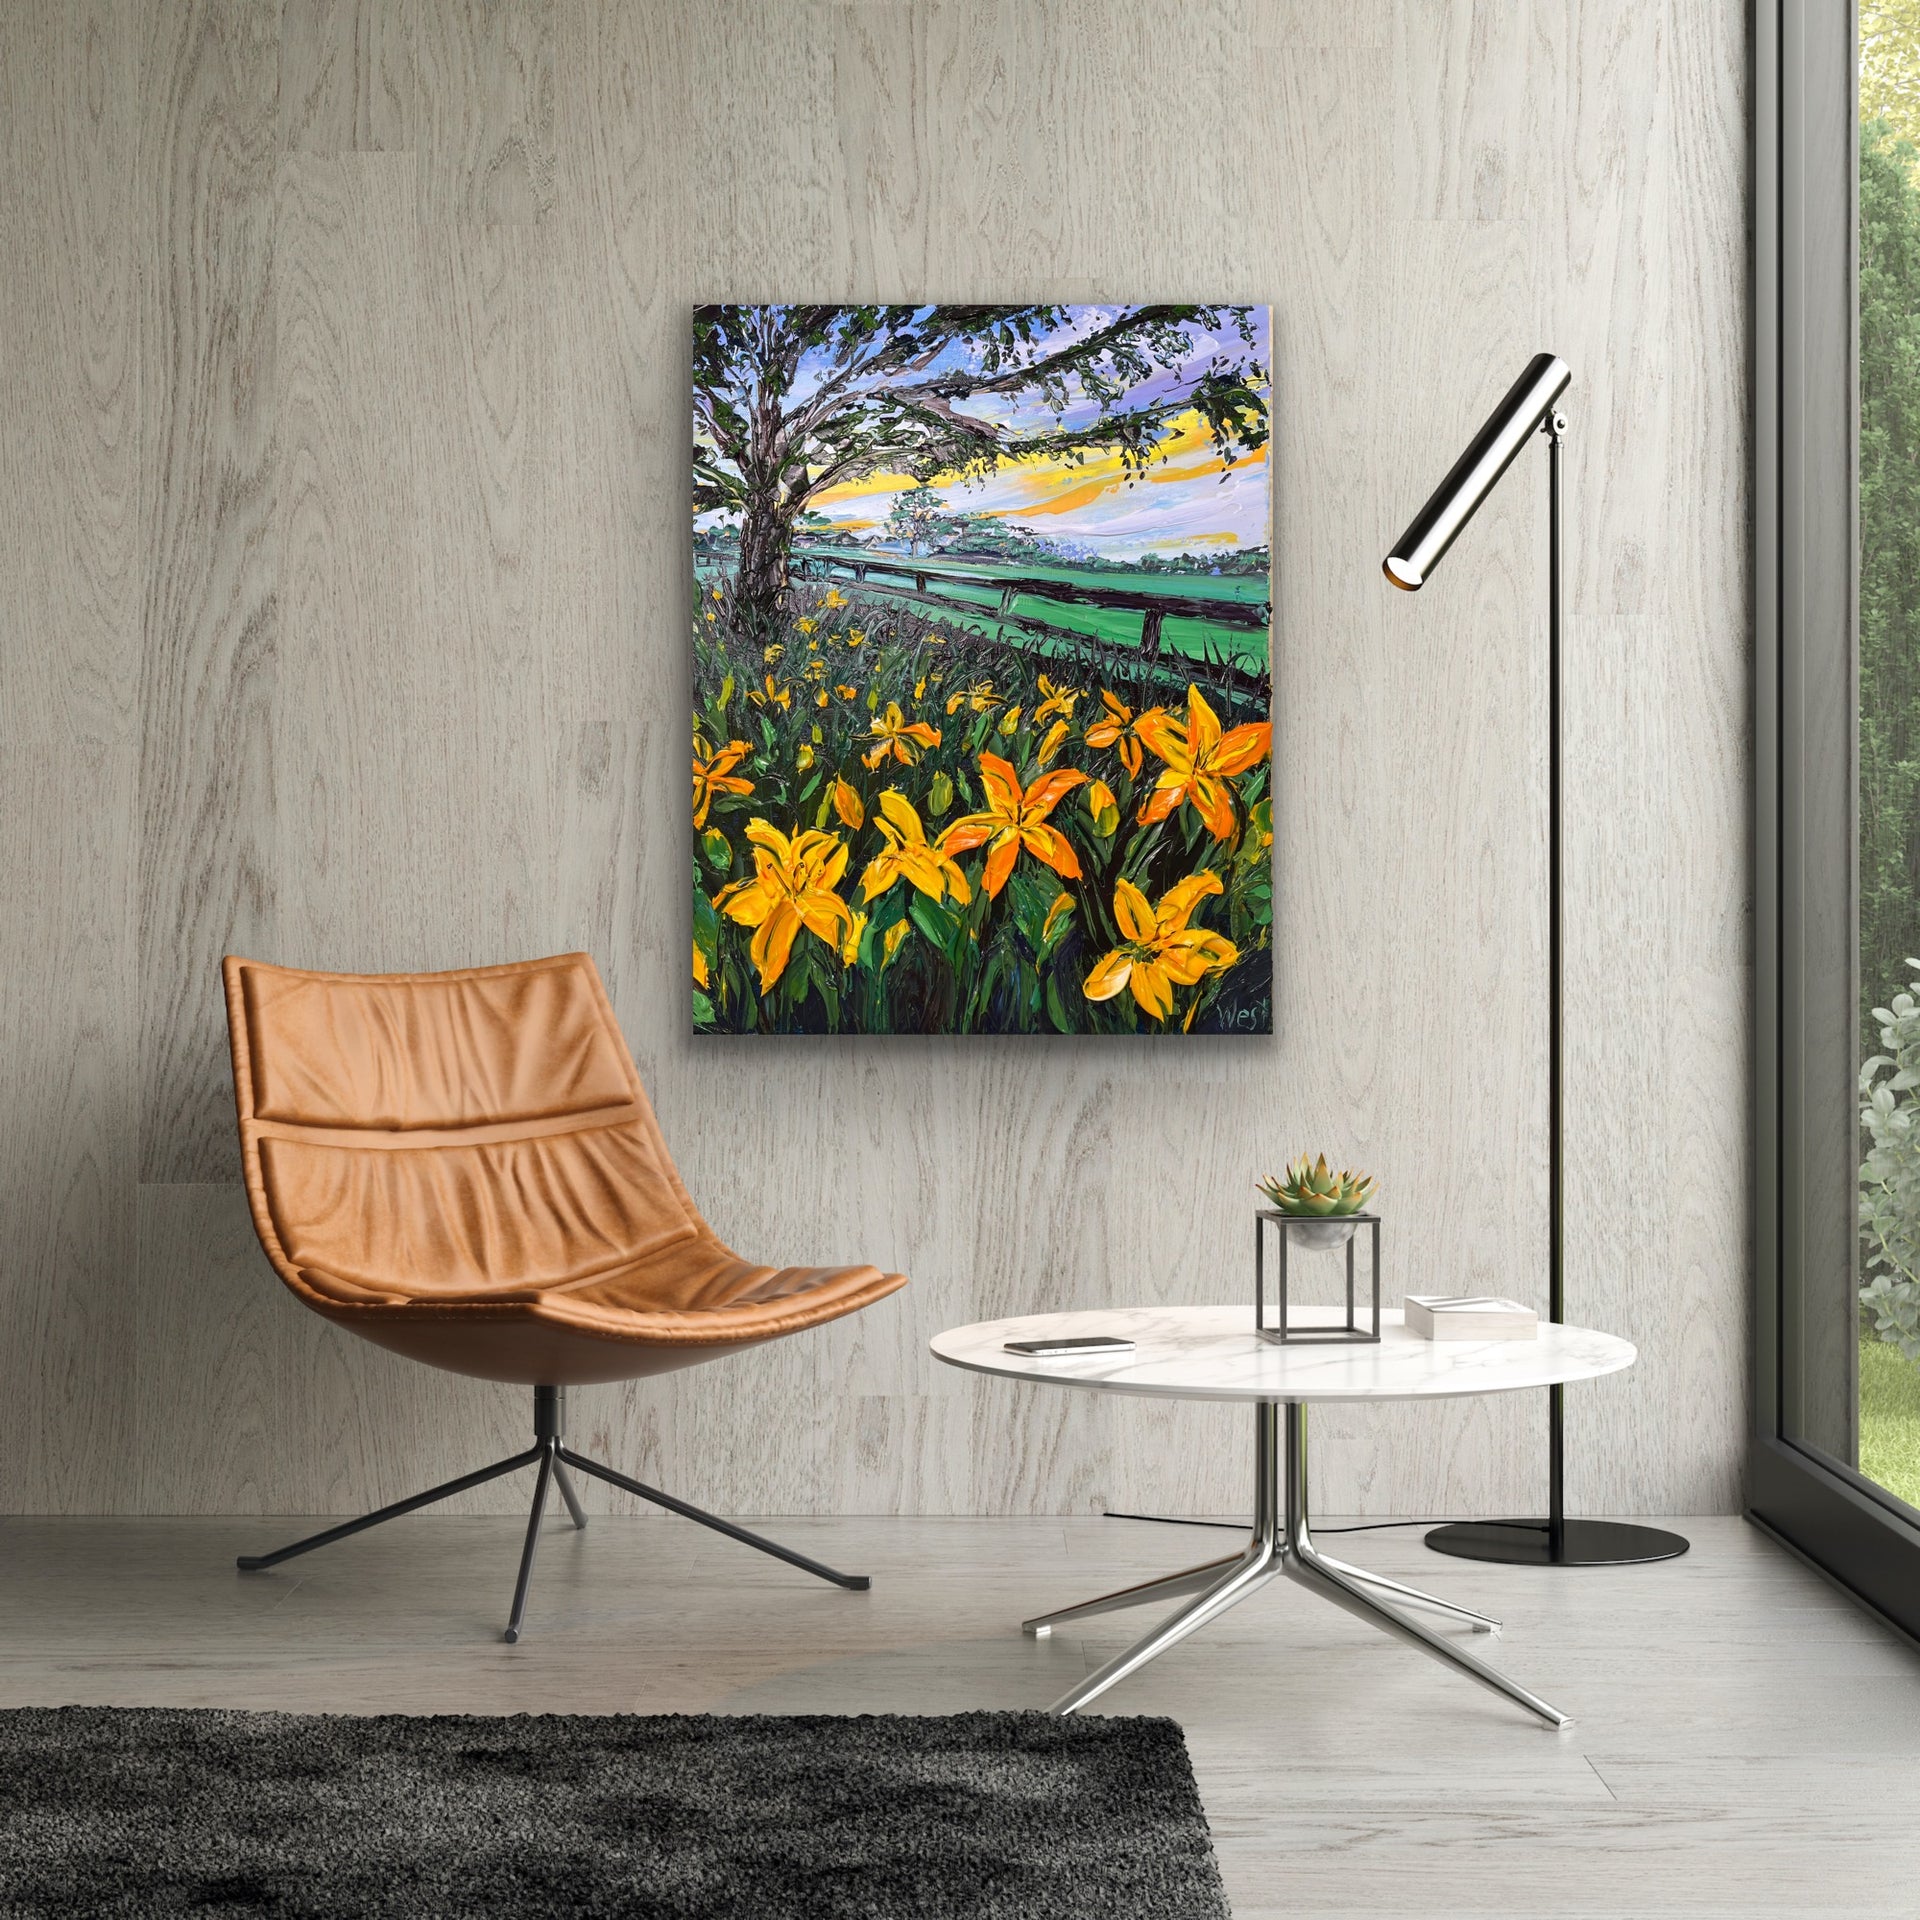 Warning: adding art to your walls can IMPROVE your health!